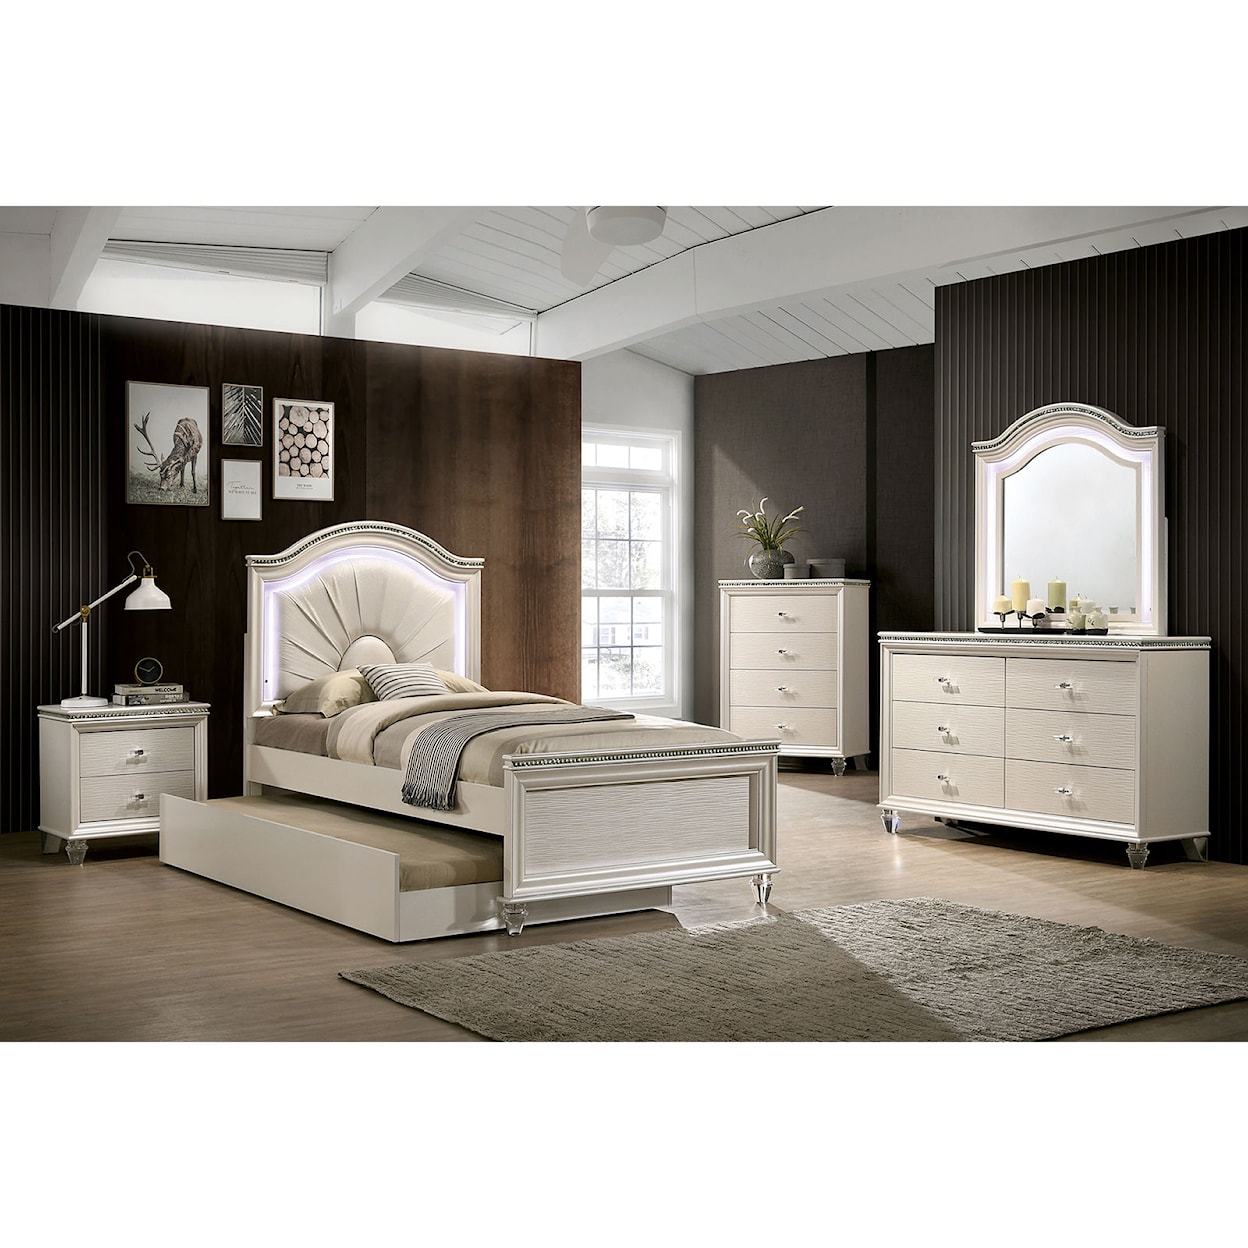 Furniture of America Allie 4-Piece Full Bedroom Set with Trundle